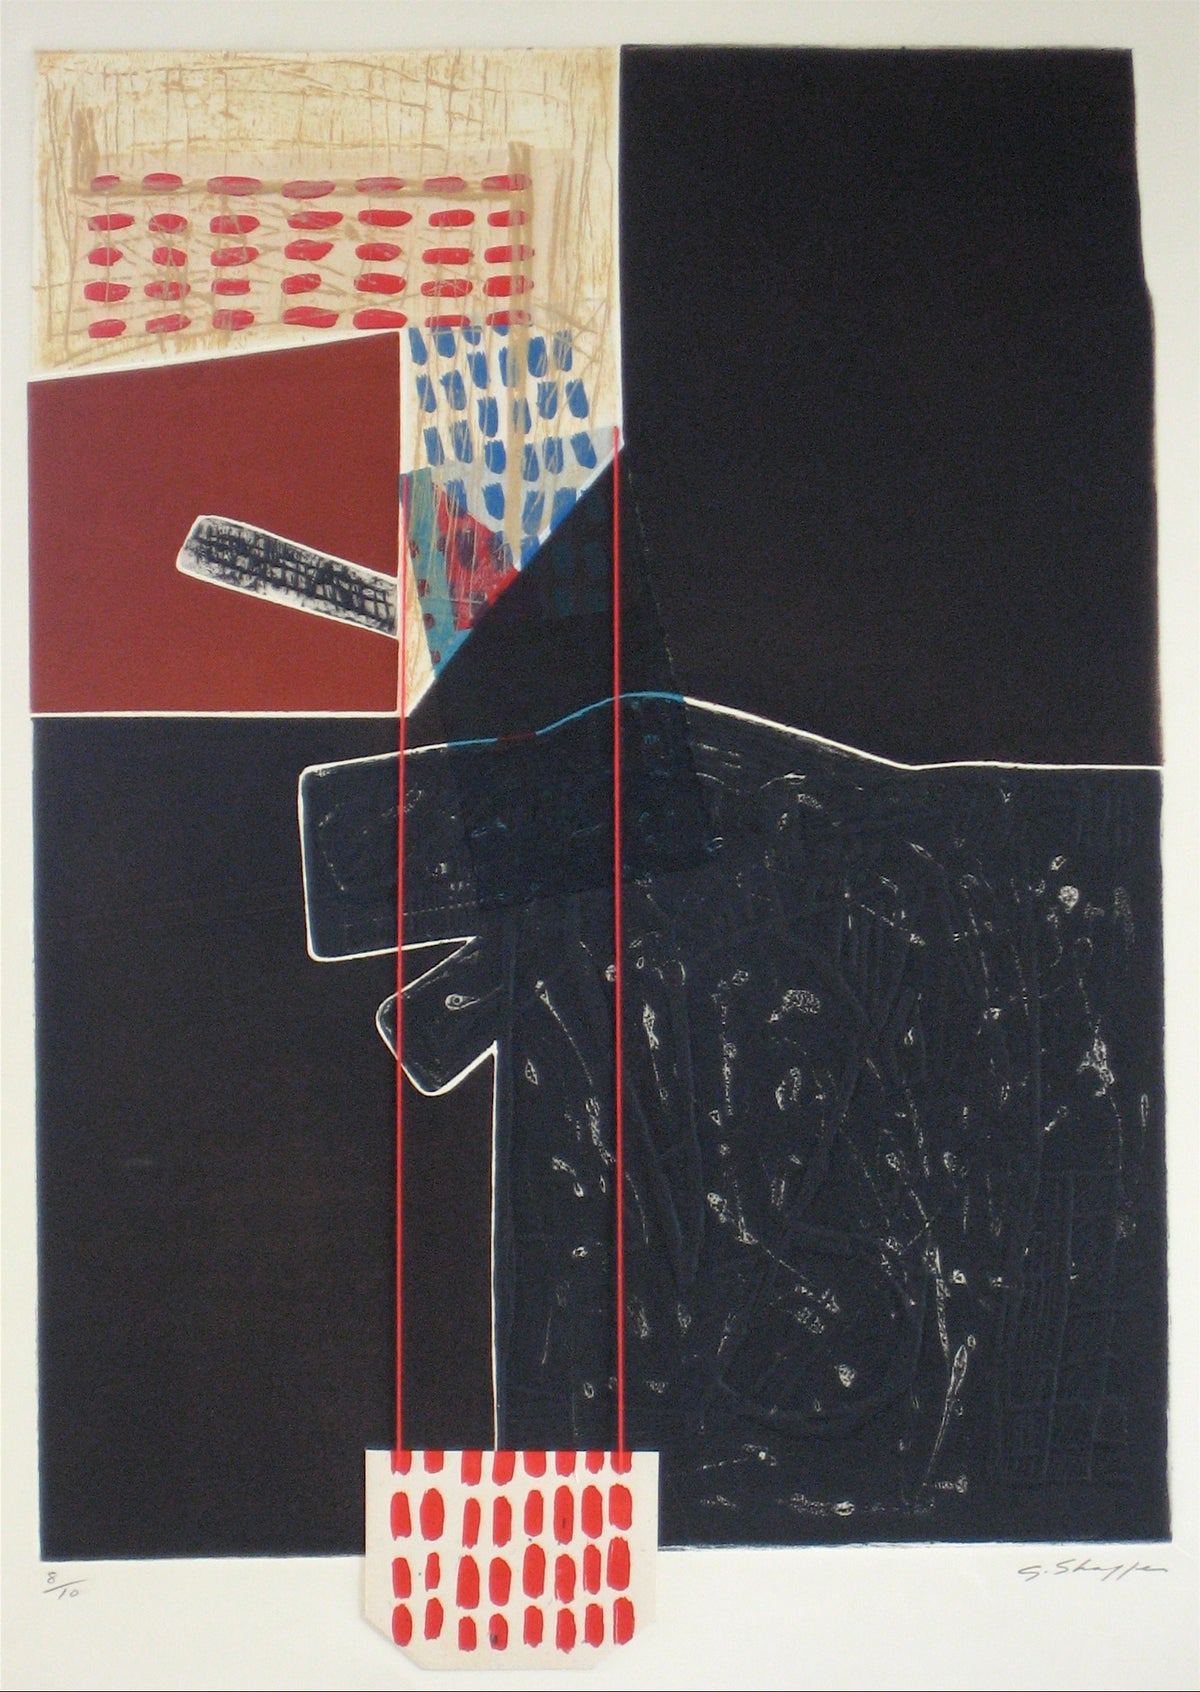 &lt;i&gt;Hang Down House XXI&lt;/i&gt; &lt;br&gt;1994 Collograph, Lithography and Mixed Media&lt;br&gt;&lt;br&gt;#12016